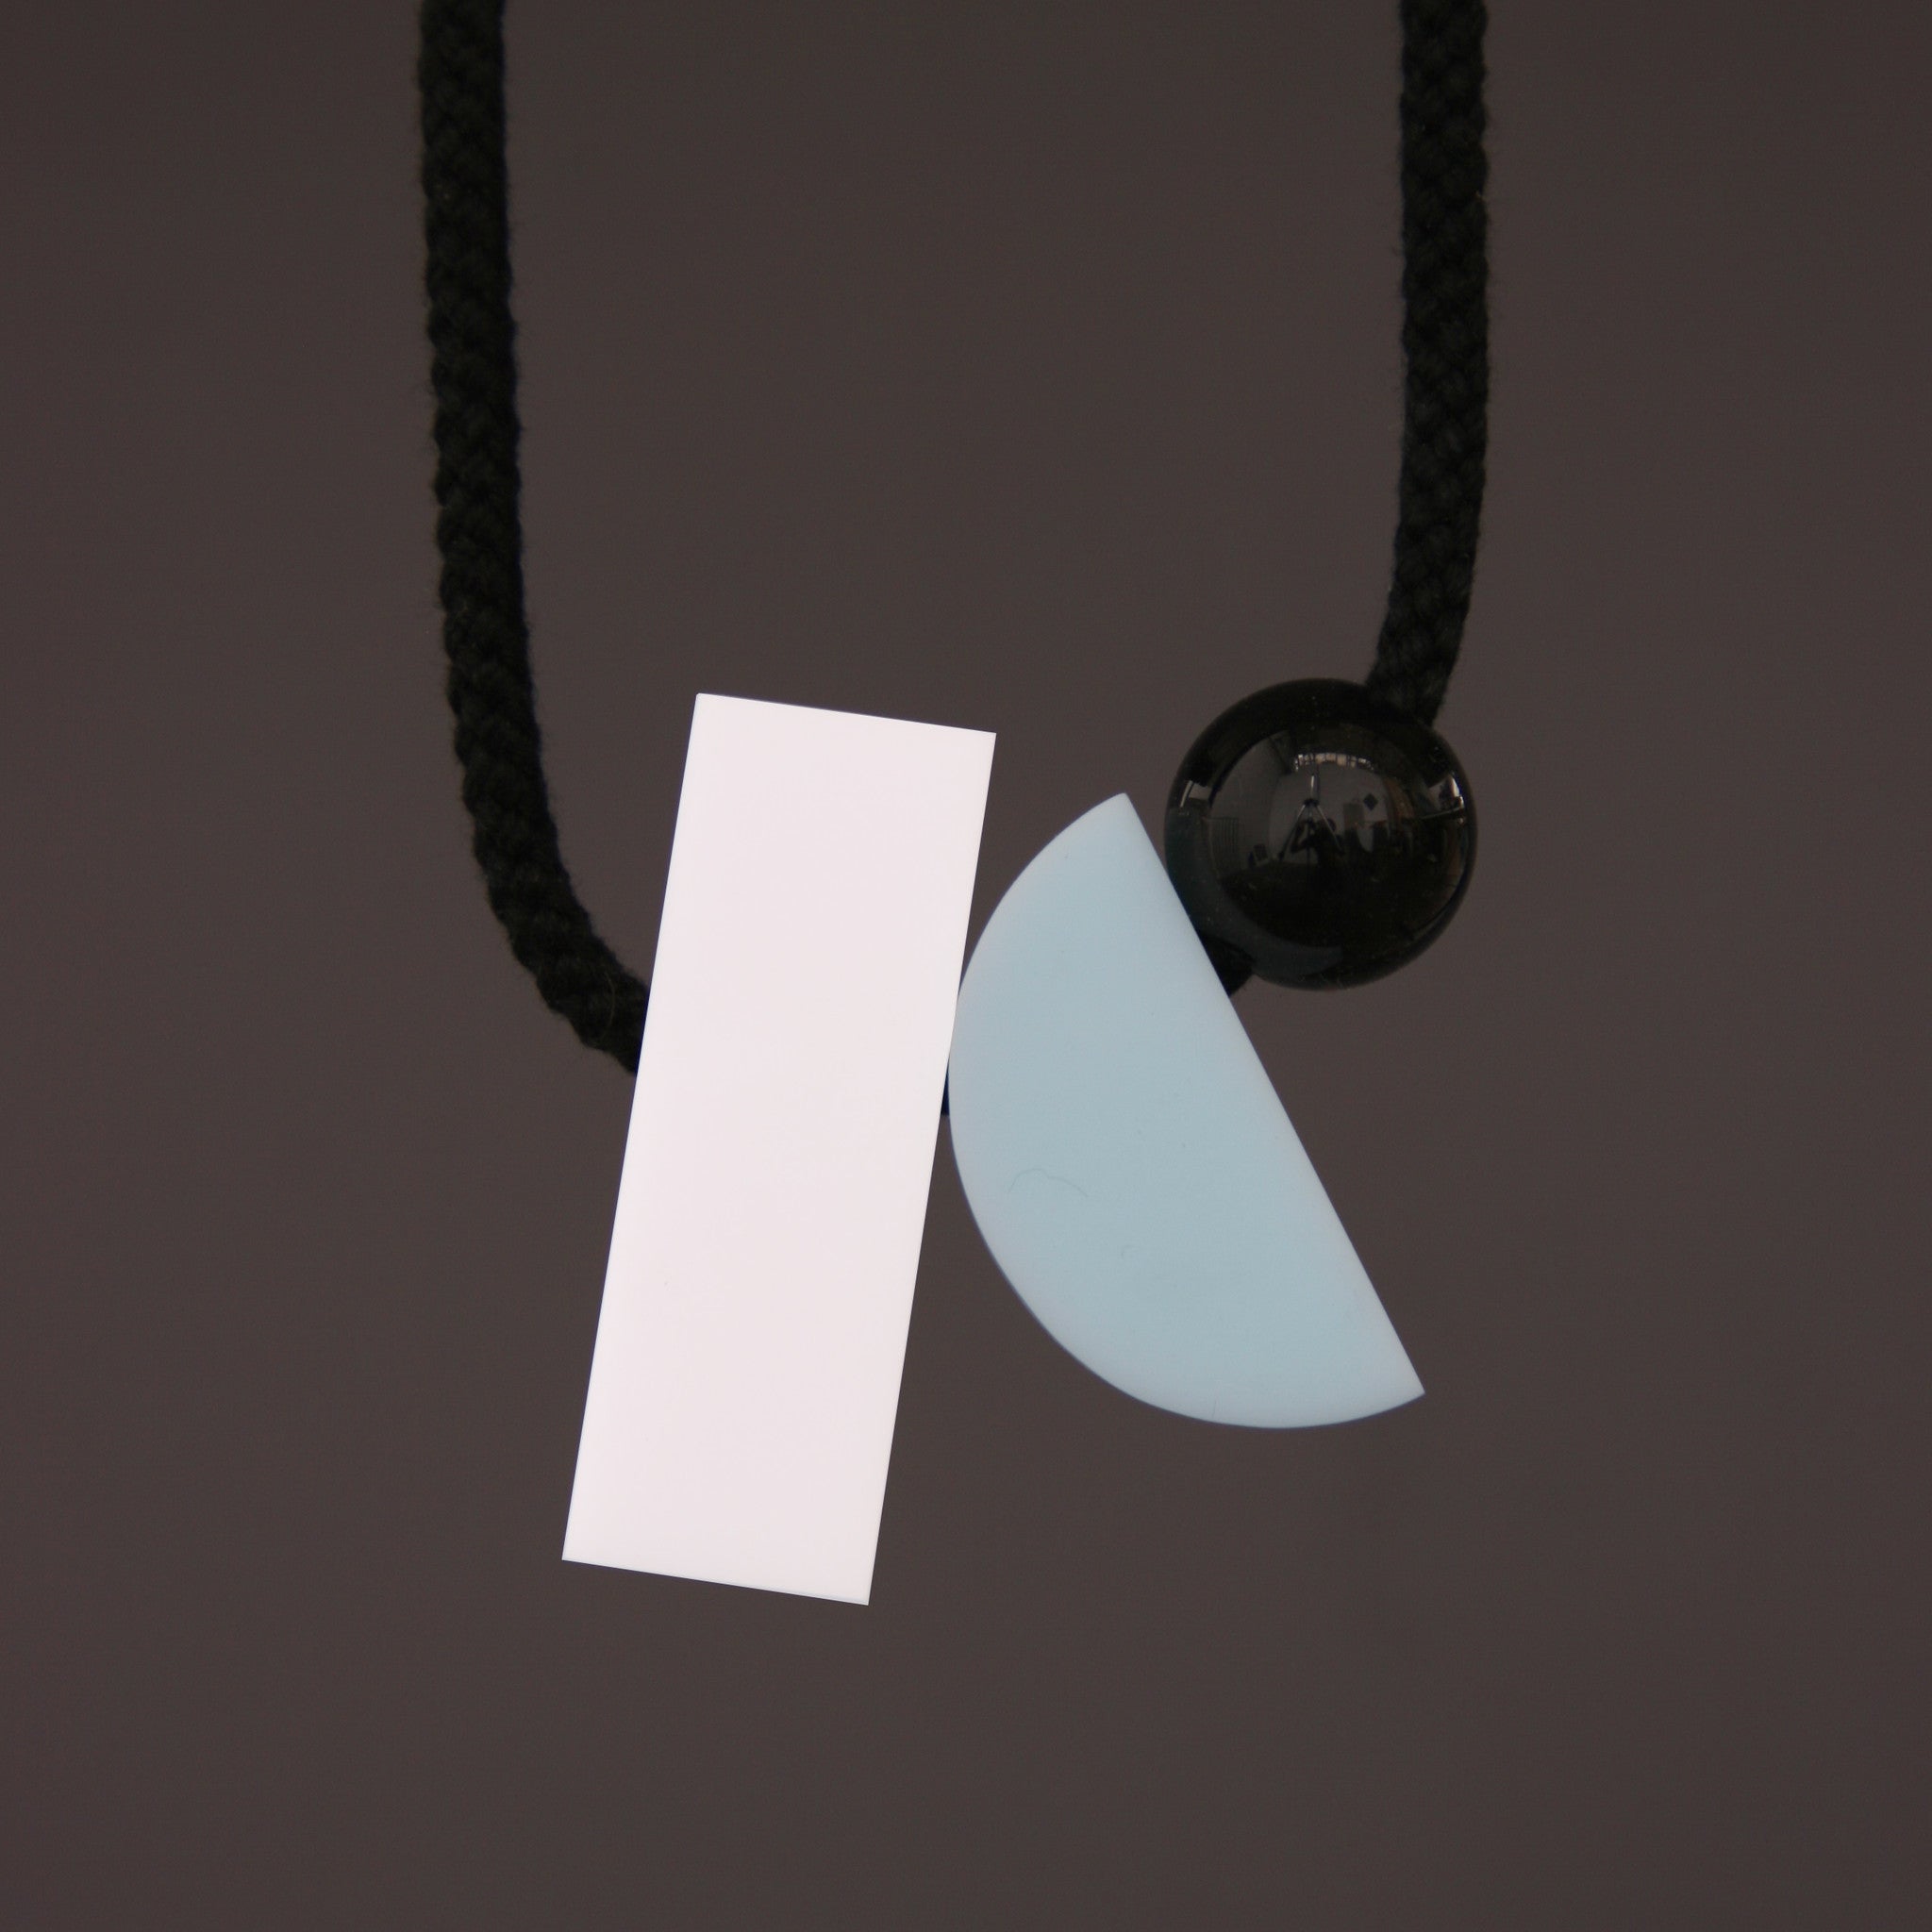 Image of Dora necklace with a white rectangle rather than pink.  Contemporary geometric necklace.